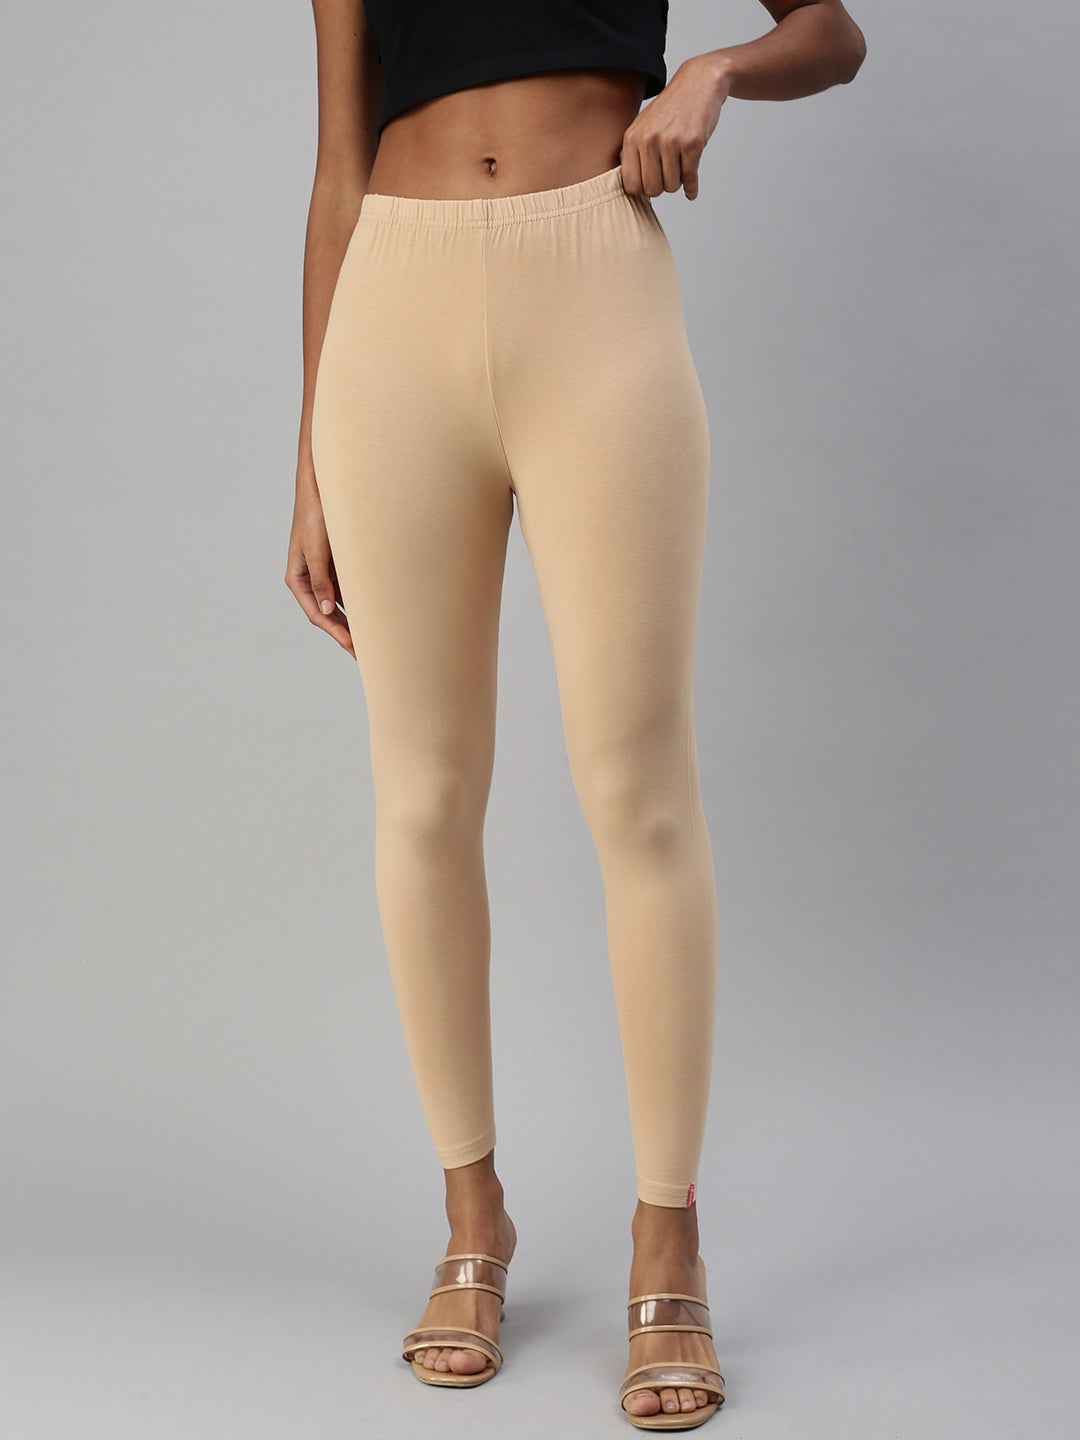 Prisma's Deep Skin Ankle Leggings - Perfect Fit and Comfortable